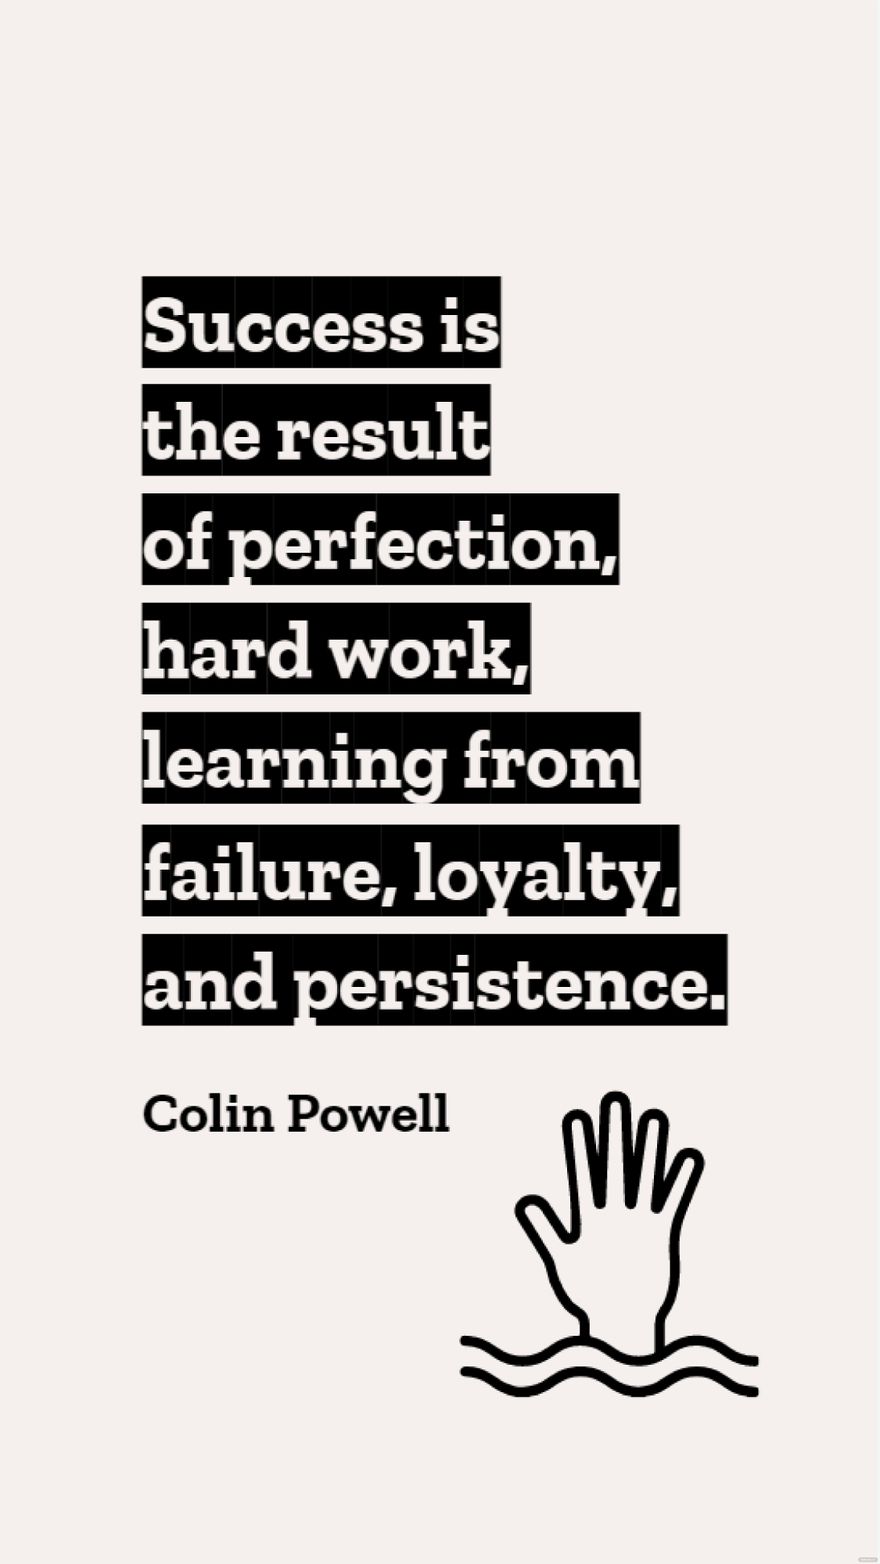 Free Colin Powell - Success is the result of perfection, hard work, learning from failure, loyalty, and persistence. in JPG